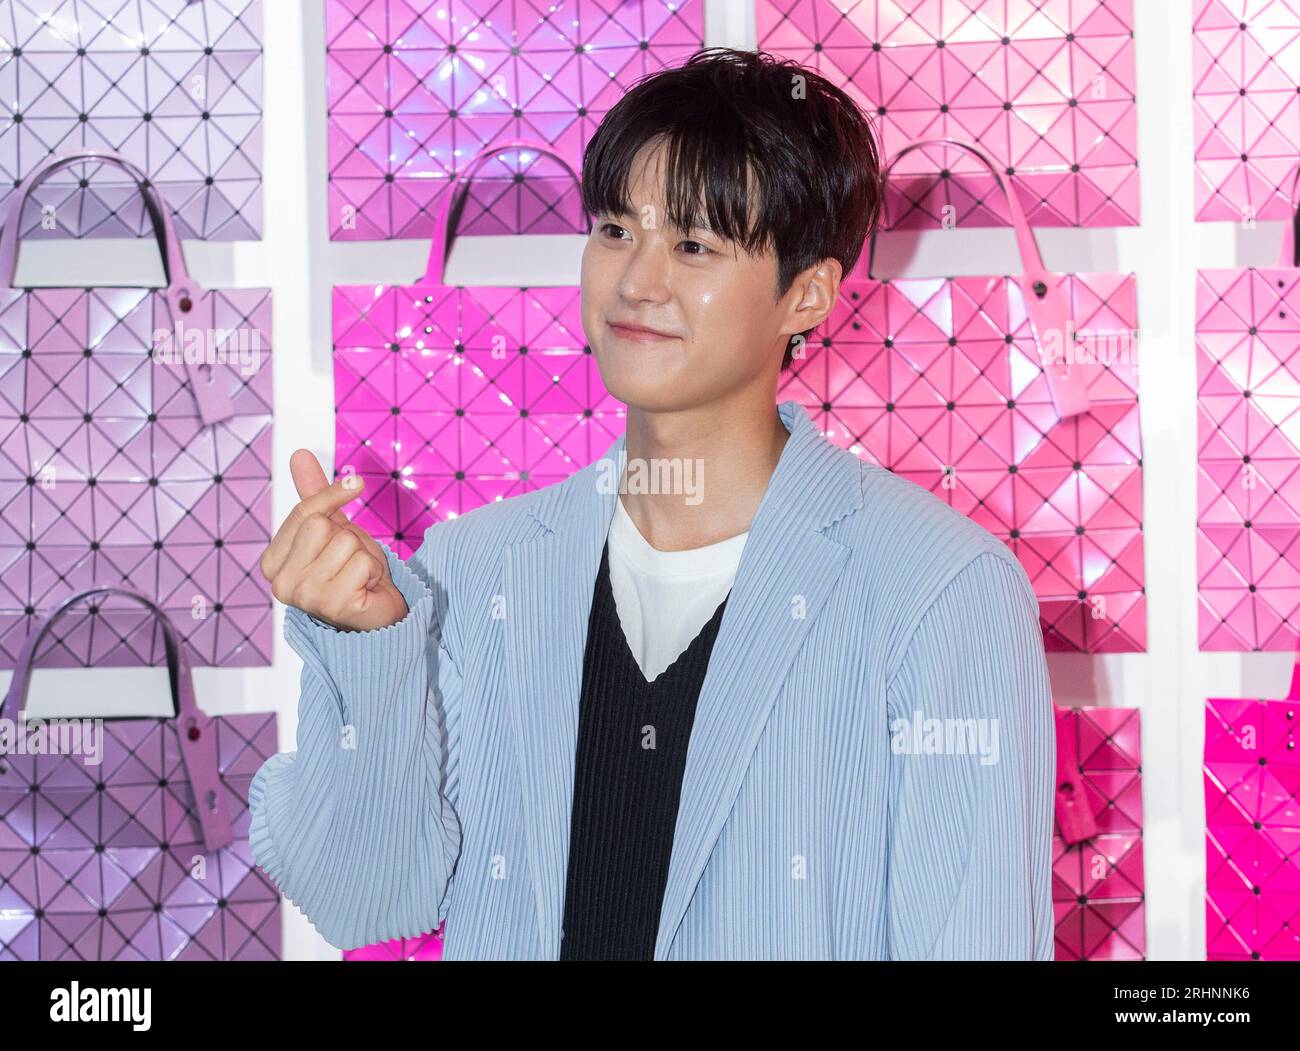 BAO BAO ISSEY MIYAKE ( Japanese fashion designer. He is known for his  technology-driven clothing designs ) Hong Kong Fashion Store China Chinese  Stock Photo - Alamy